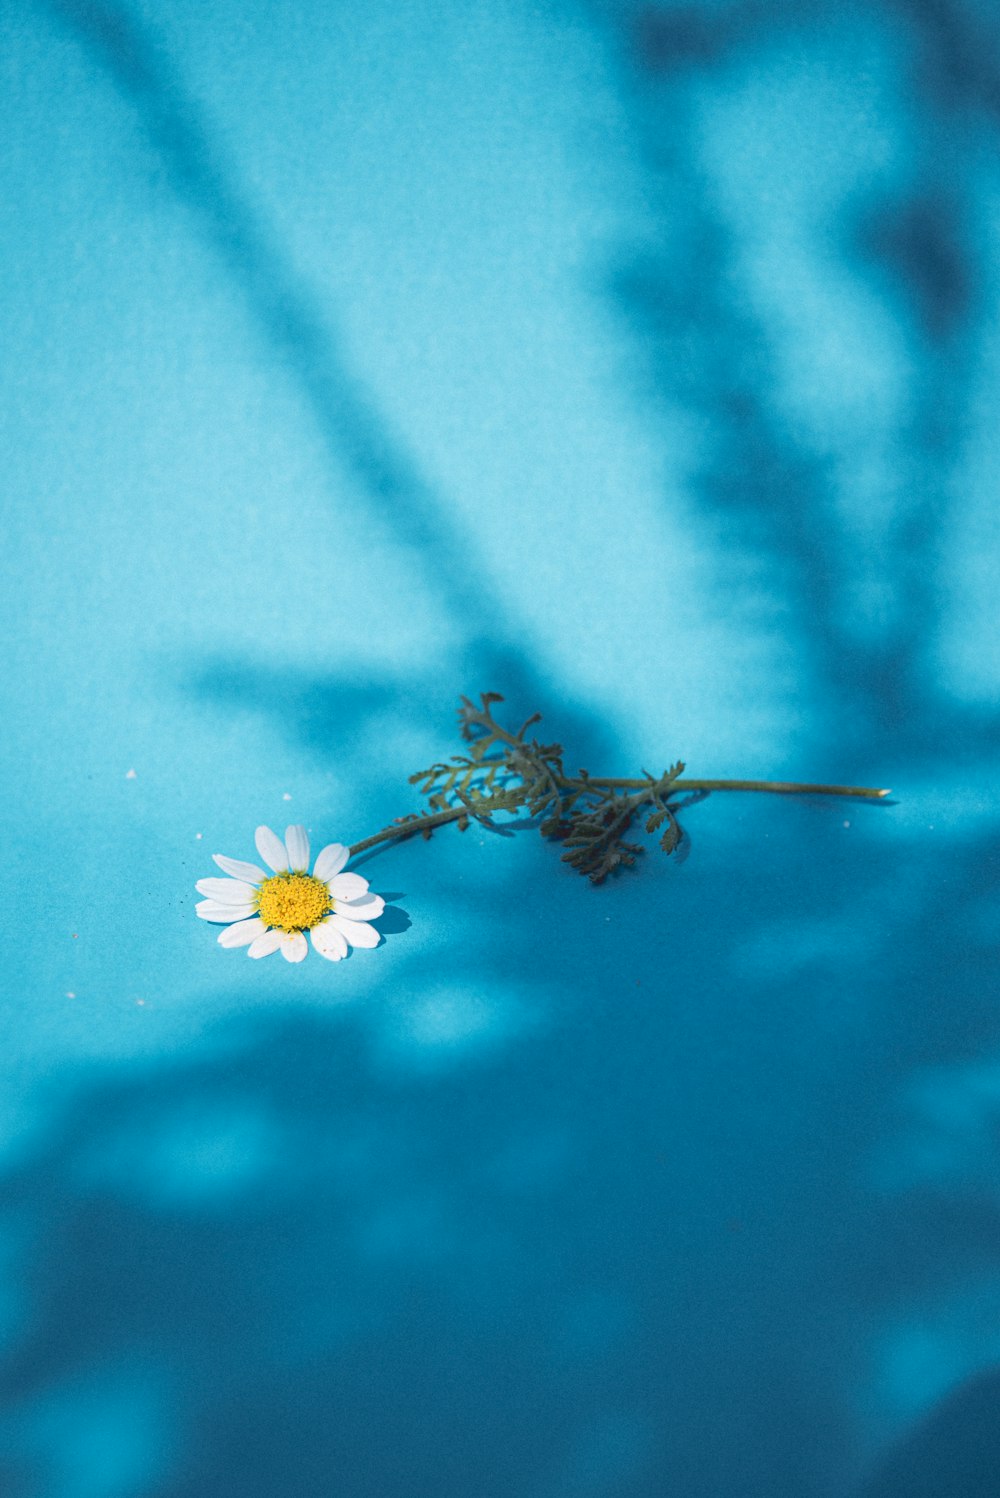 a single flower is floating in a pool of water